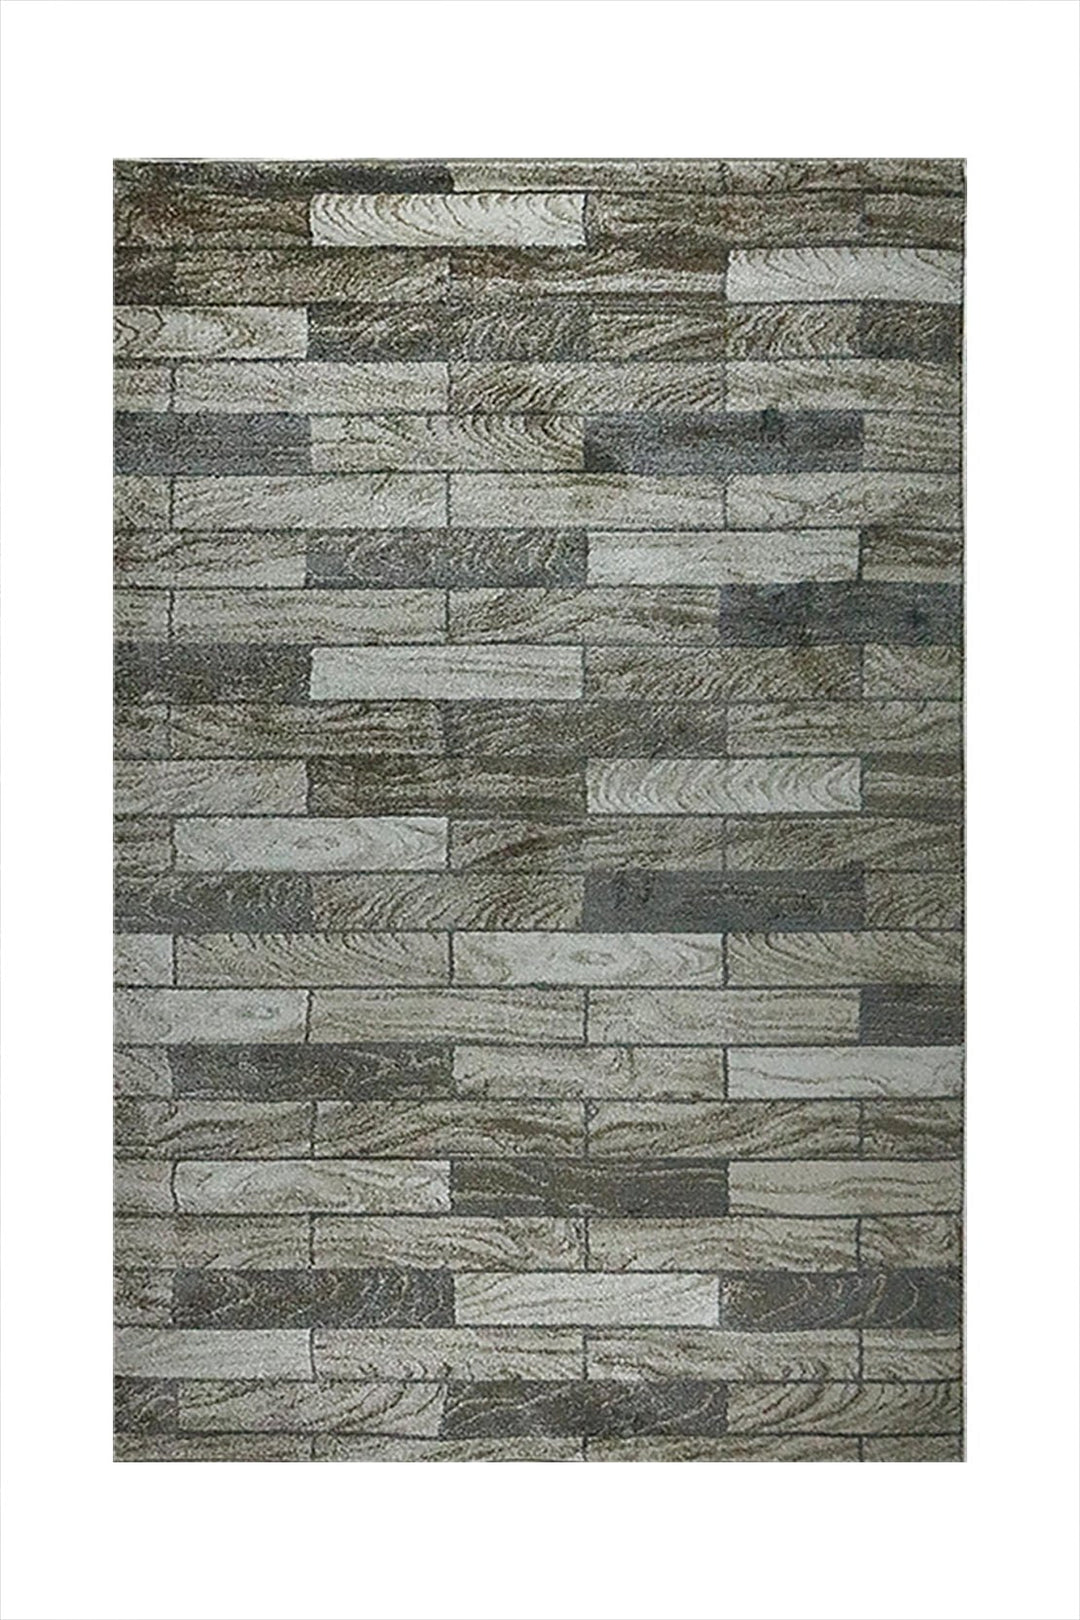 Turkish Modern Festival WD Rug - 5.3 x 7.5 FT - Brown - Sleek and Minimalist for Chic Interiors - V Surfaces